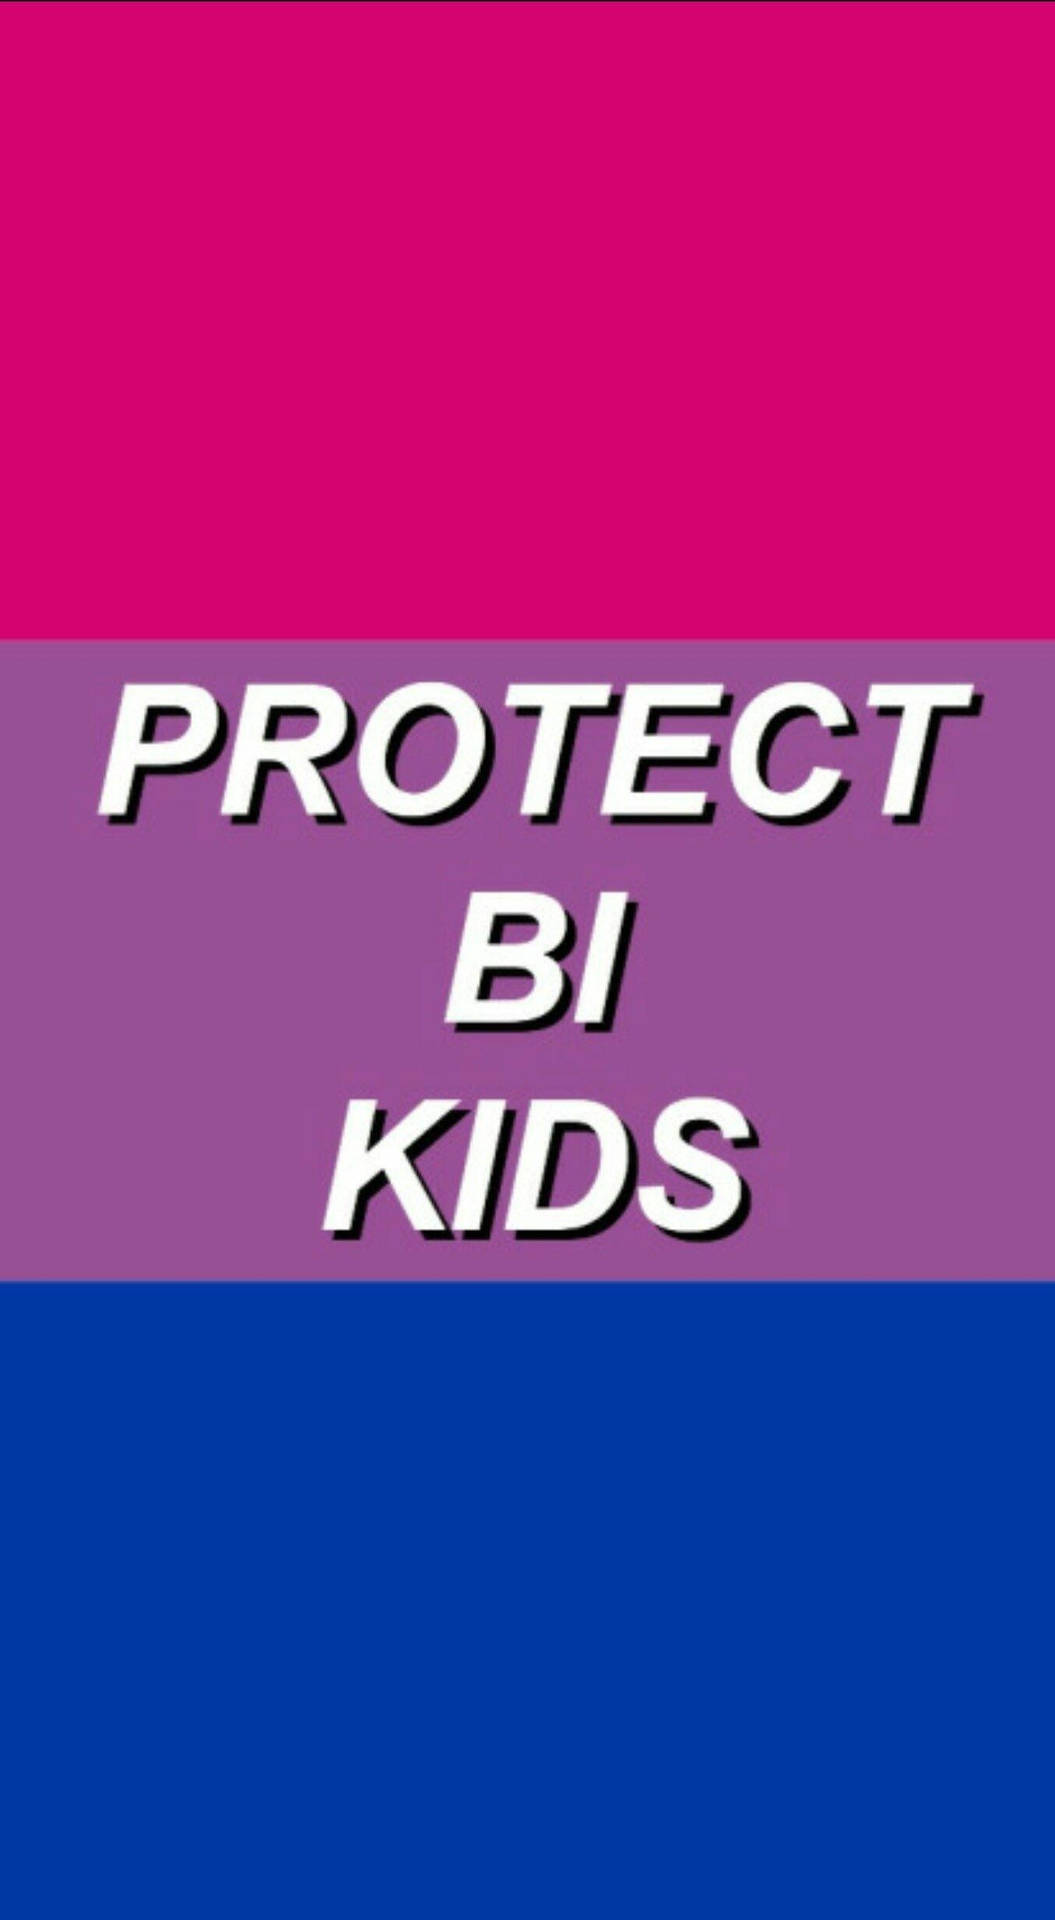 Protect Bisexual Kids Background